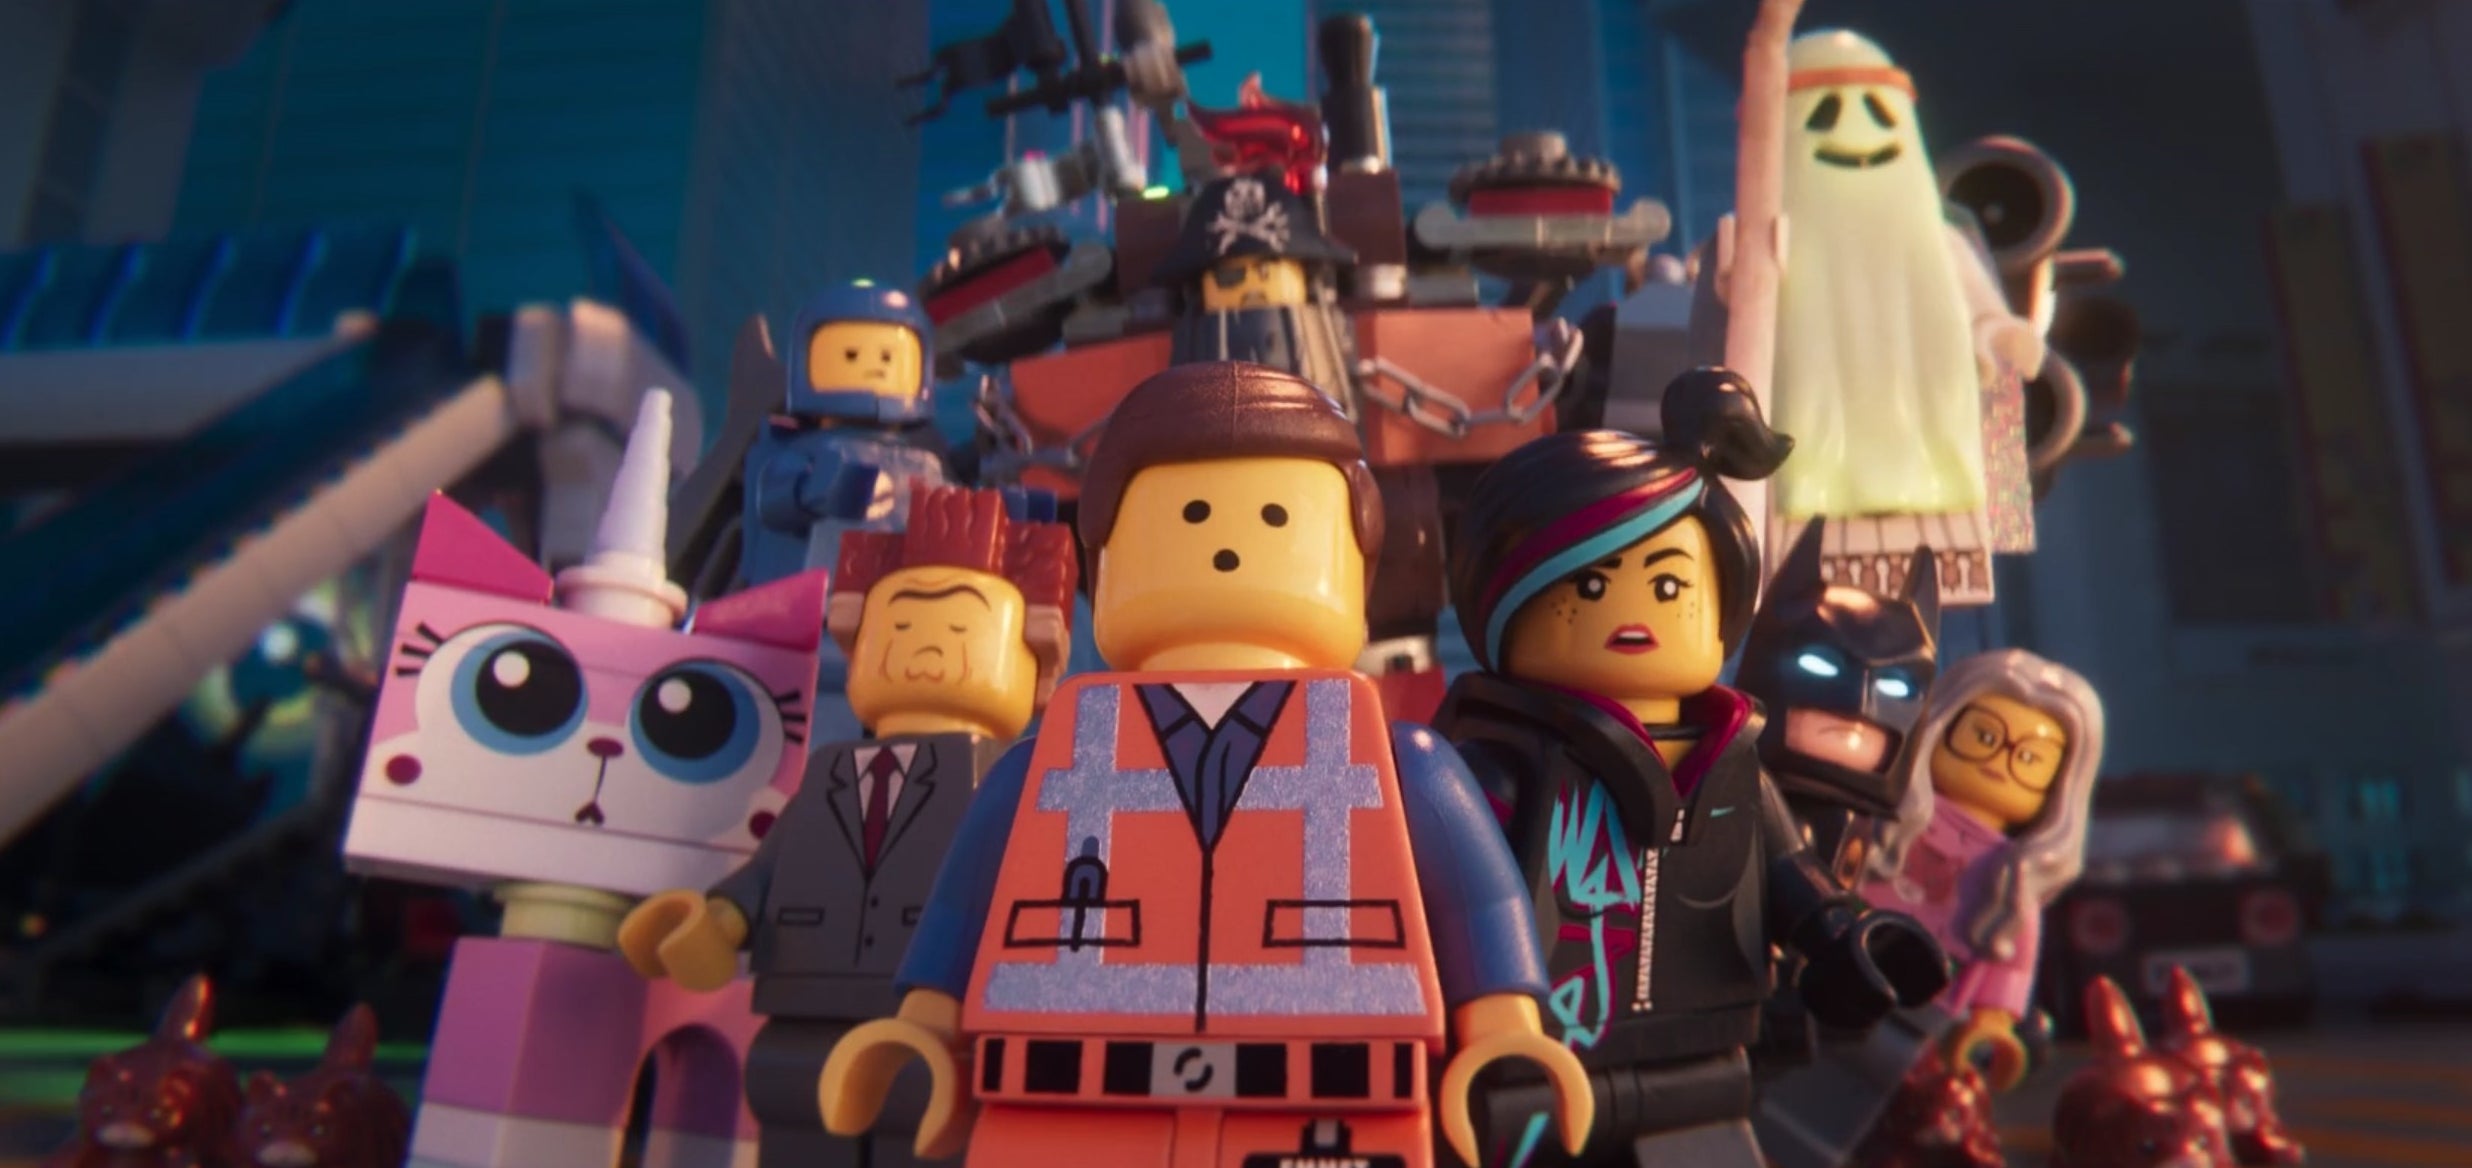 A group of LEGO characters looks at something offscreen